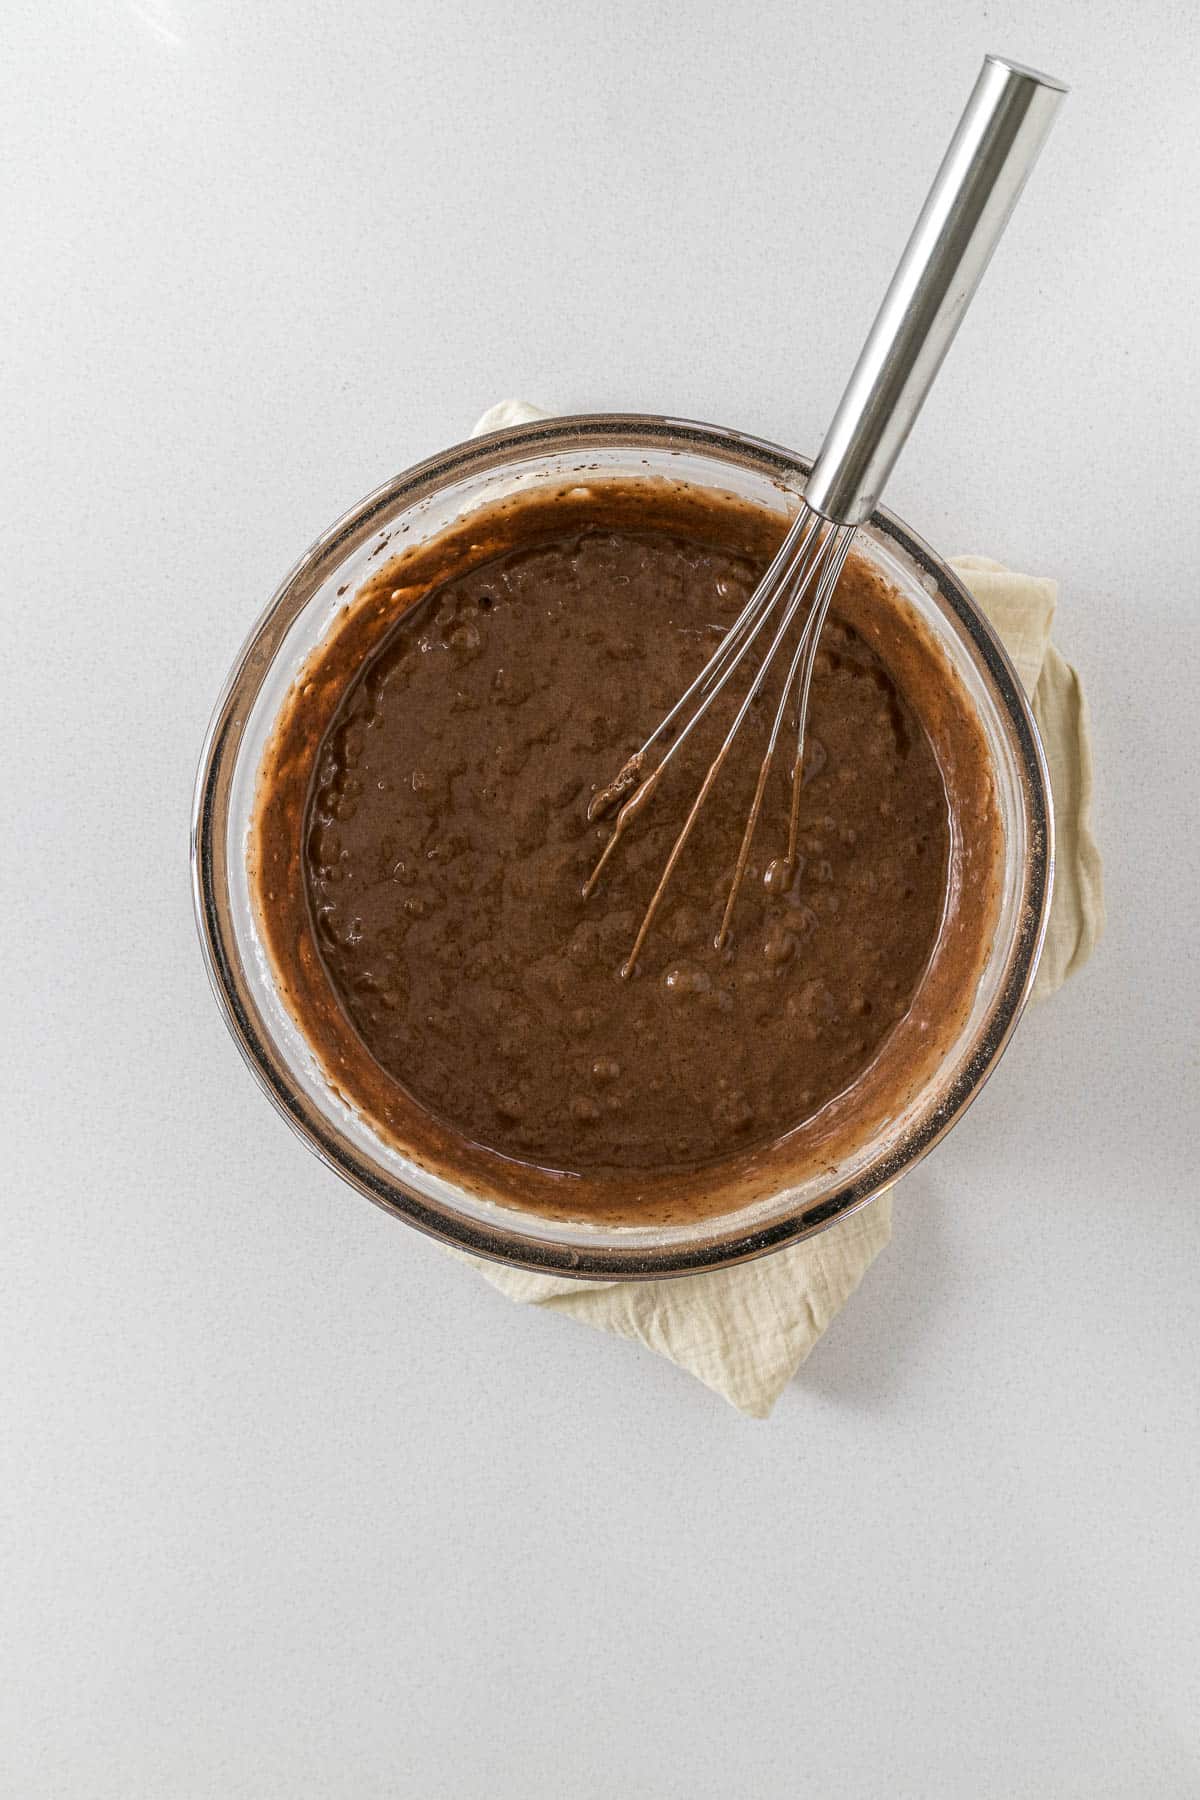 Chocolate cake batter in a large mixing bowl.